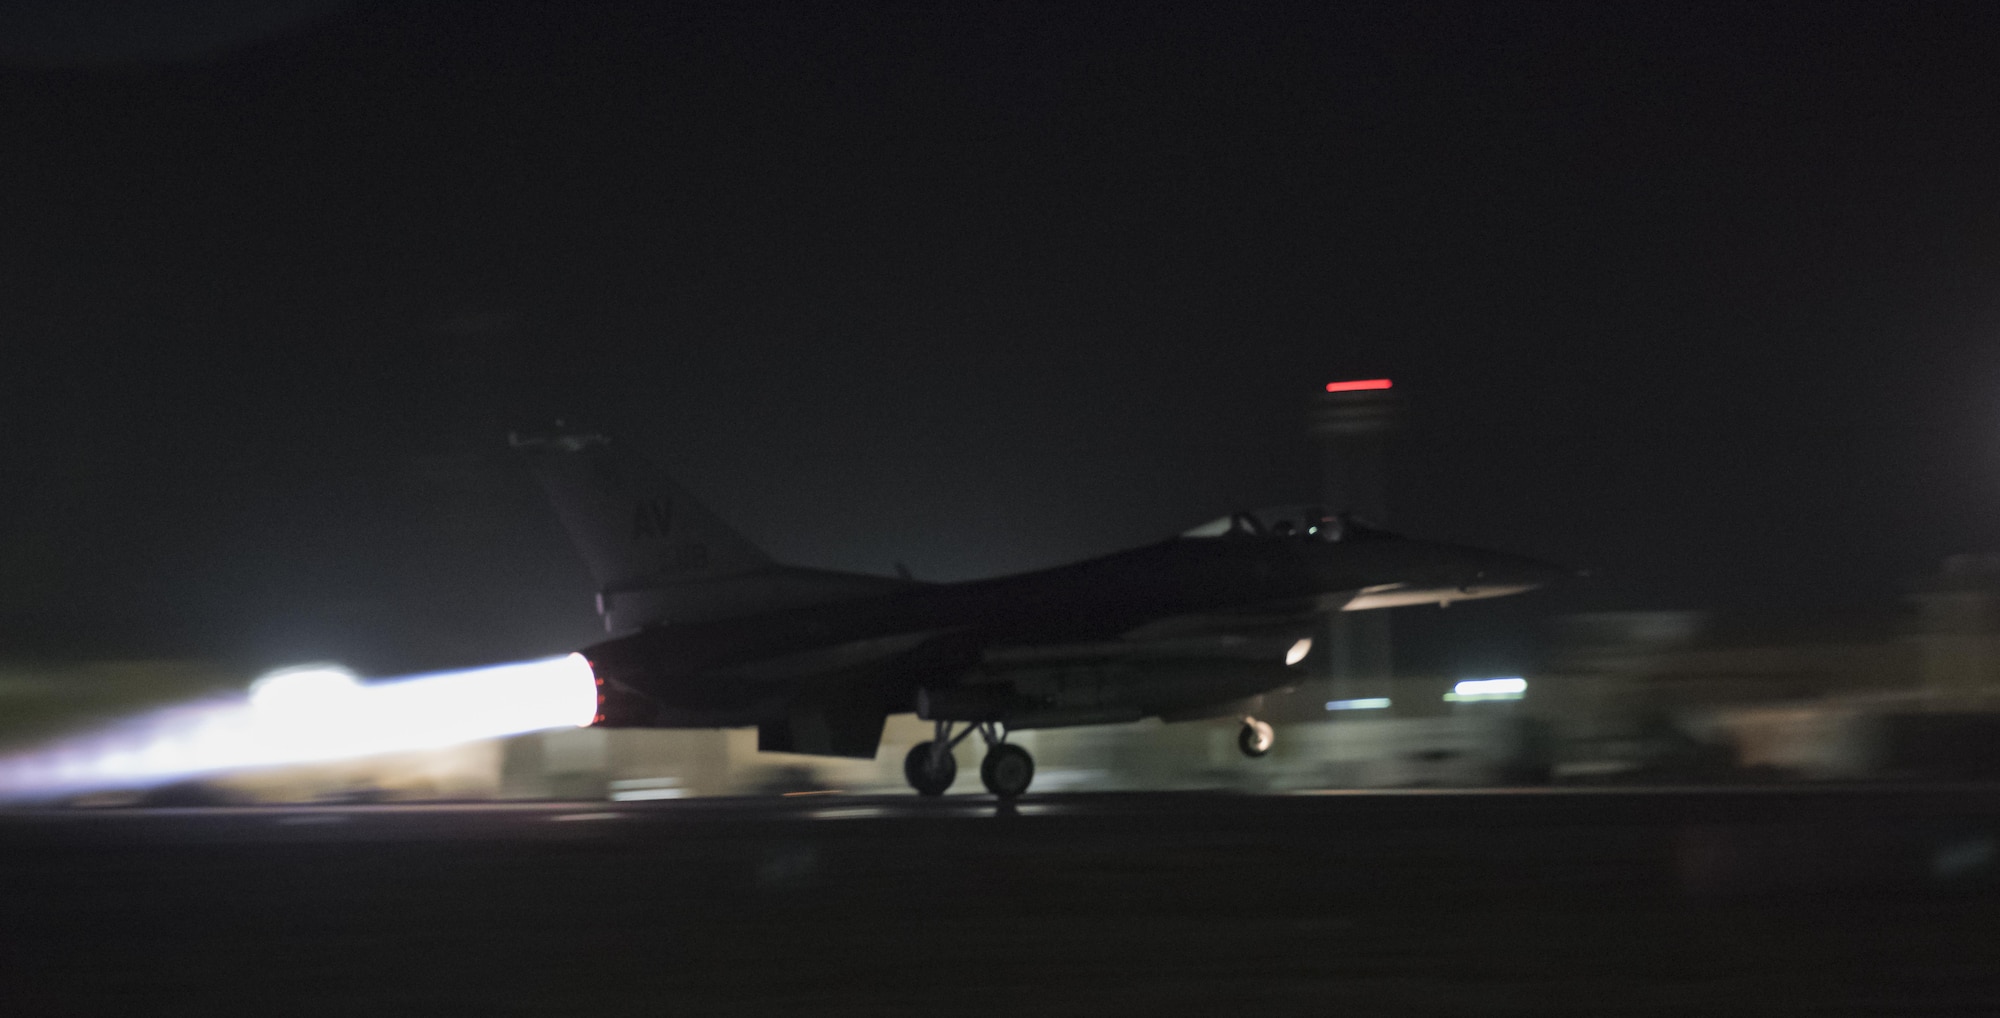 An F-16 Fighting Falcon from the 555th Expeditionary Fighter Squadron takes off from Bagram Airfield, Afghanistan, June 16, 2017. The F-16 is a compact, multi-role fighter aircraft. It is highly maneuverable and has proven itself in air-to-air combat and air-to-surface attack. In Afghanistan, the F-16, also known as a Viper, provides precision airpower to degrade and deter enemy activity.(U.S. Air Force photo by Staff Sgt. Benjamin Gonsier)